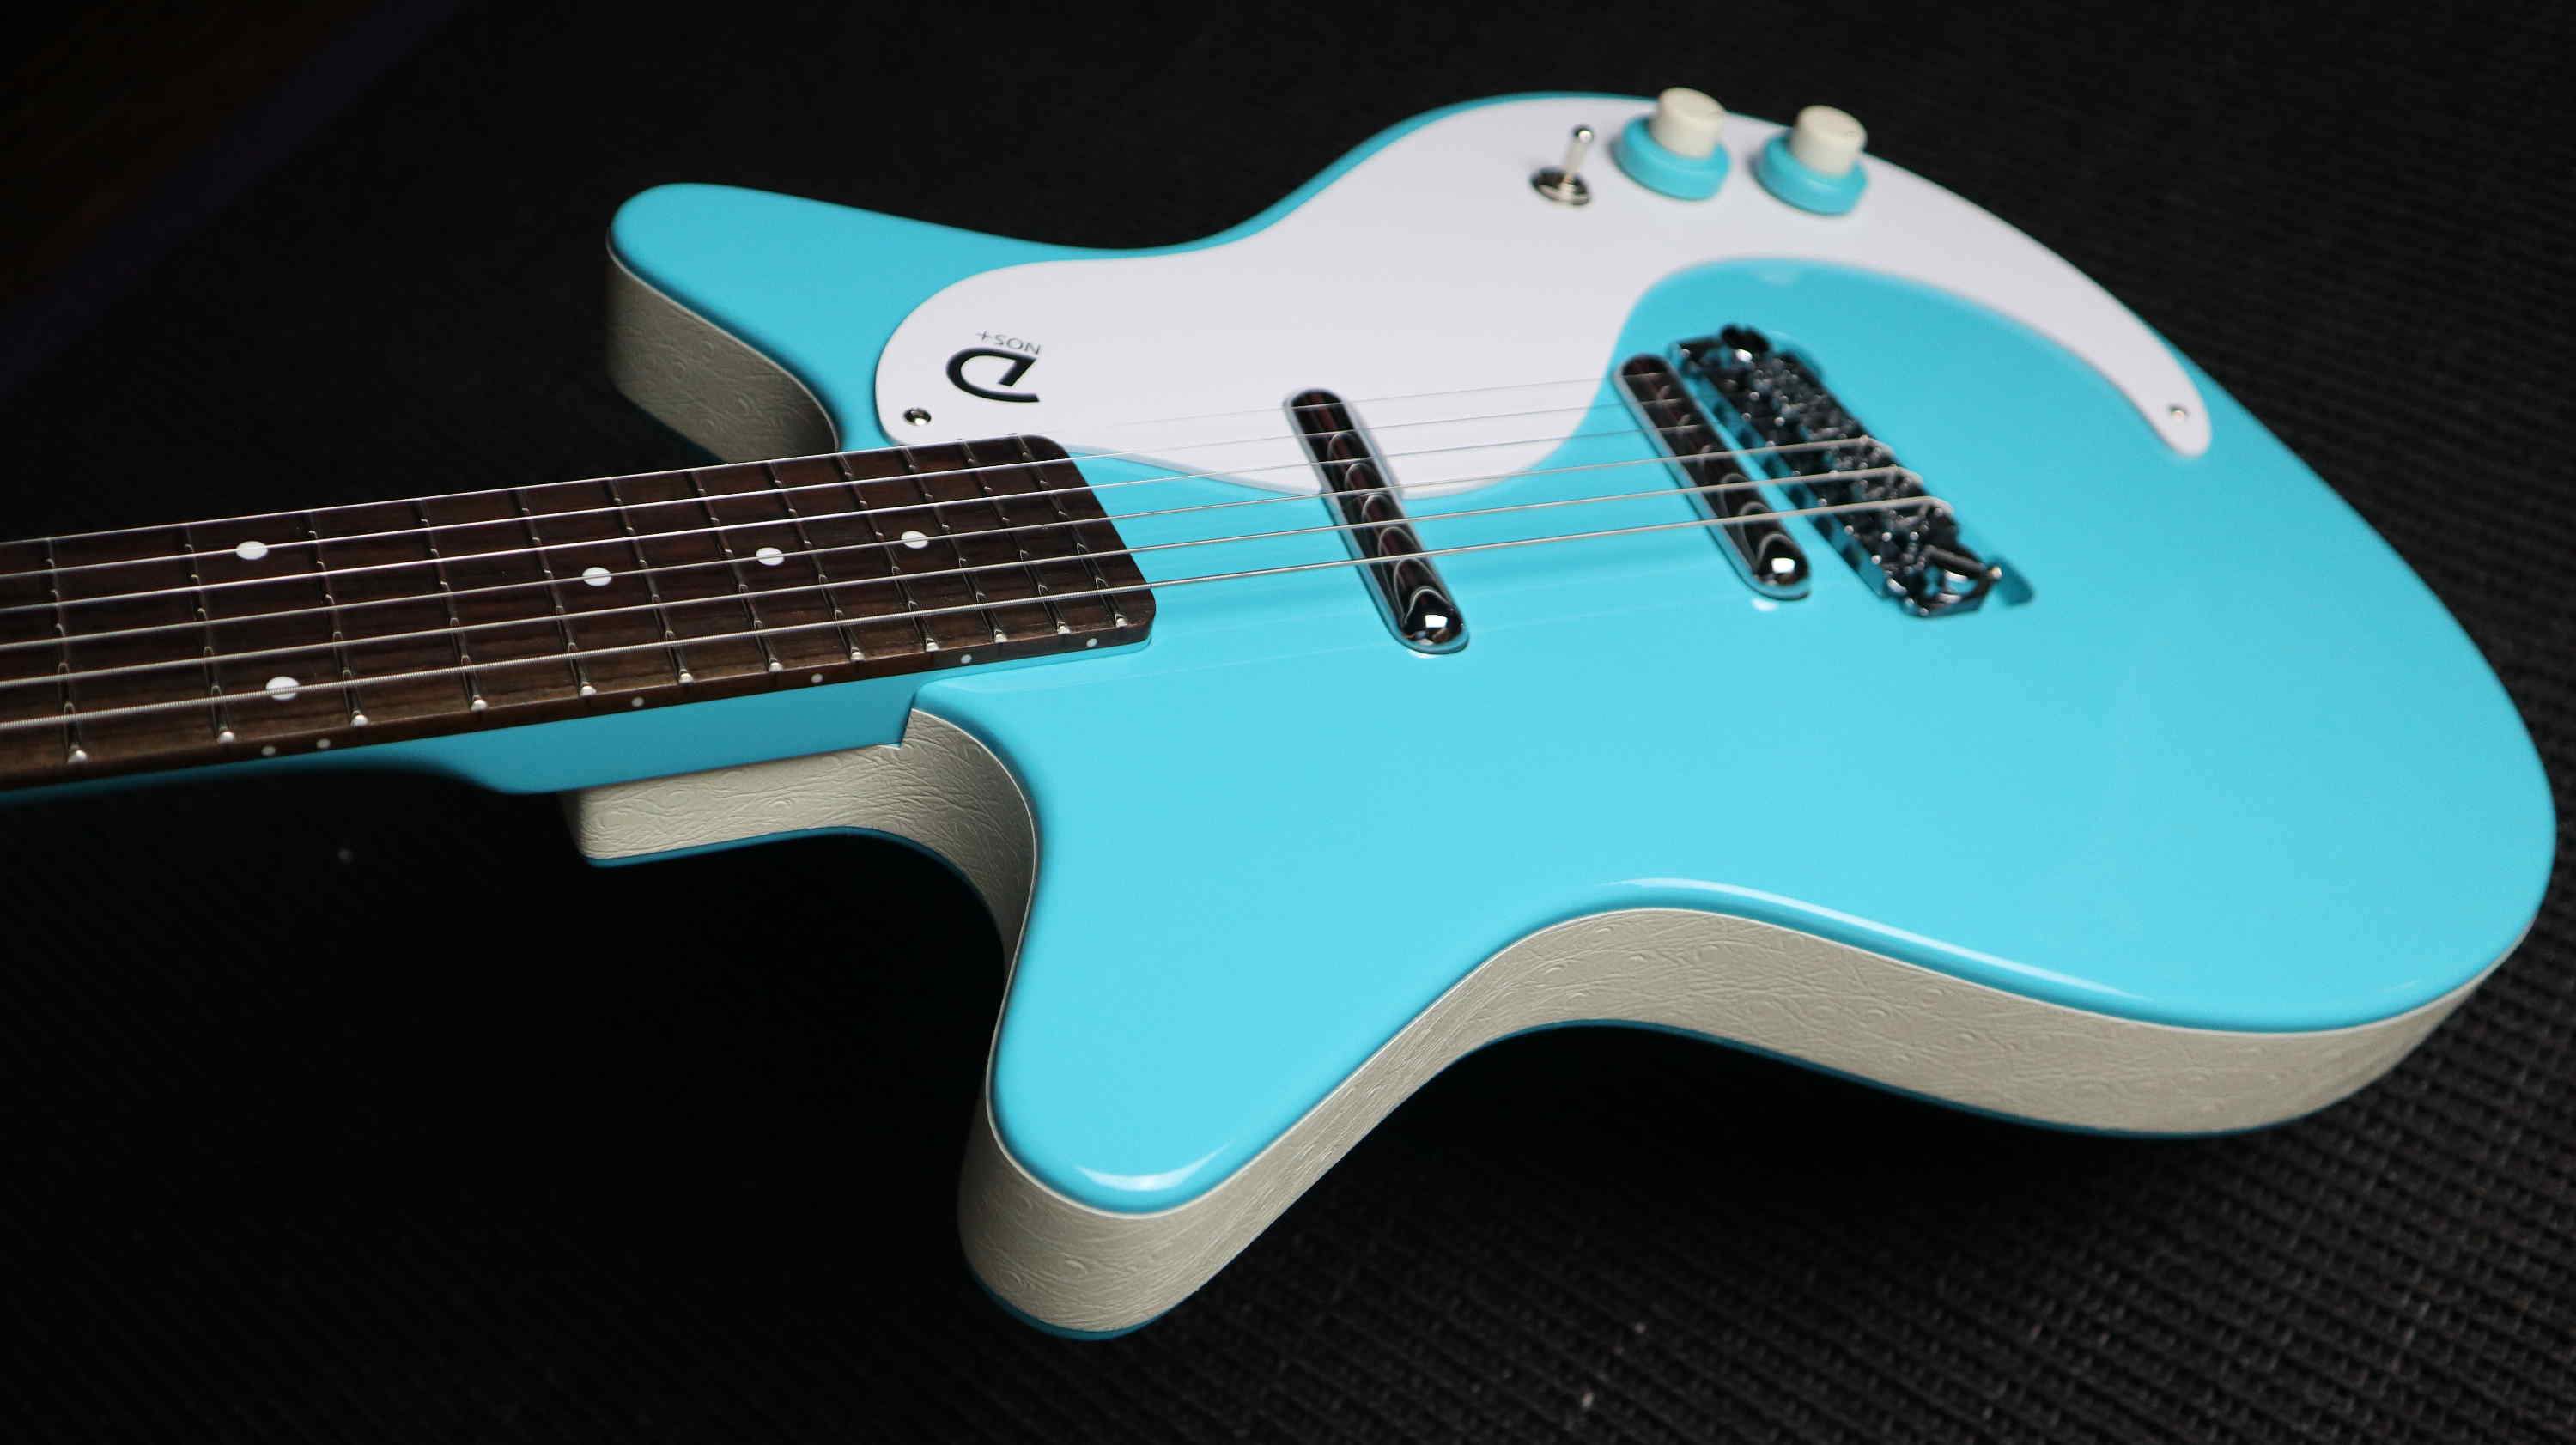 Danelectro '59M NOS Guitar ~ Baby Come Back Blue, Electric Guitar for sale at Richards Guitars.